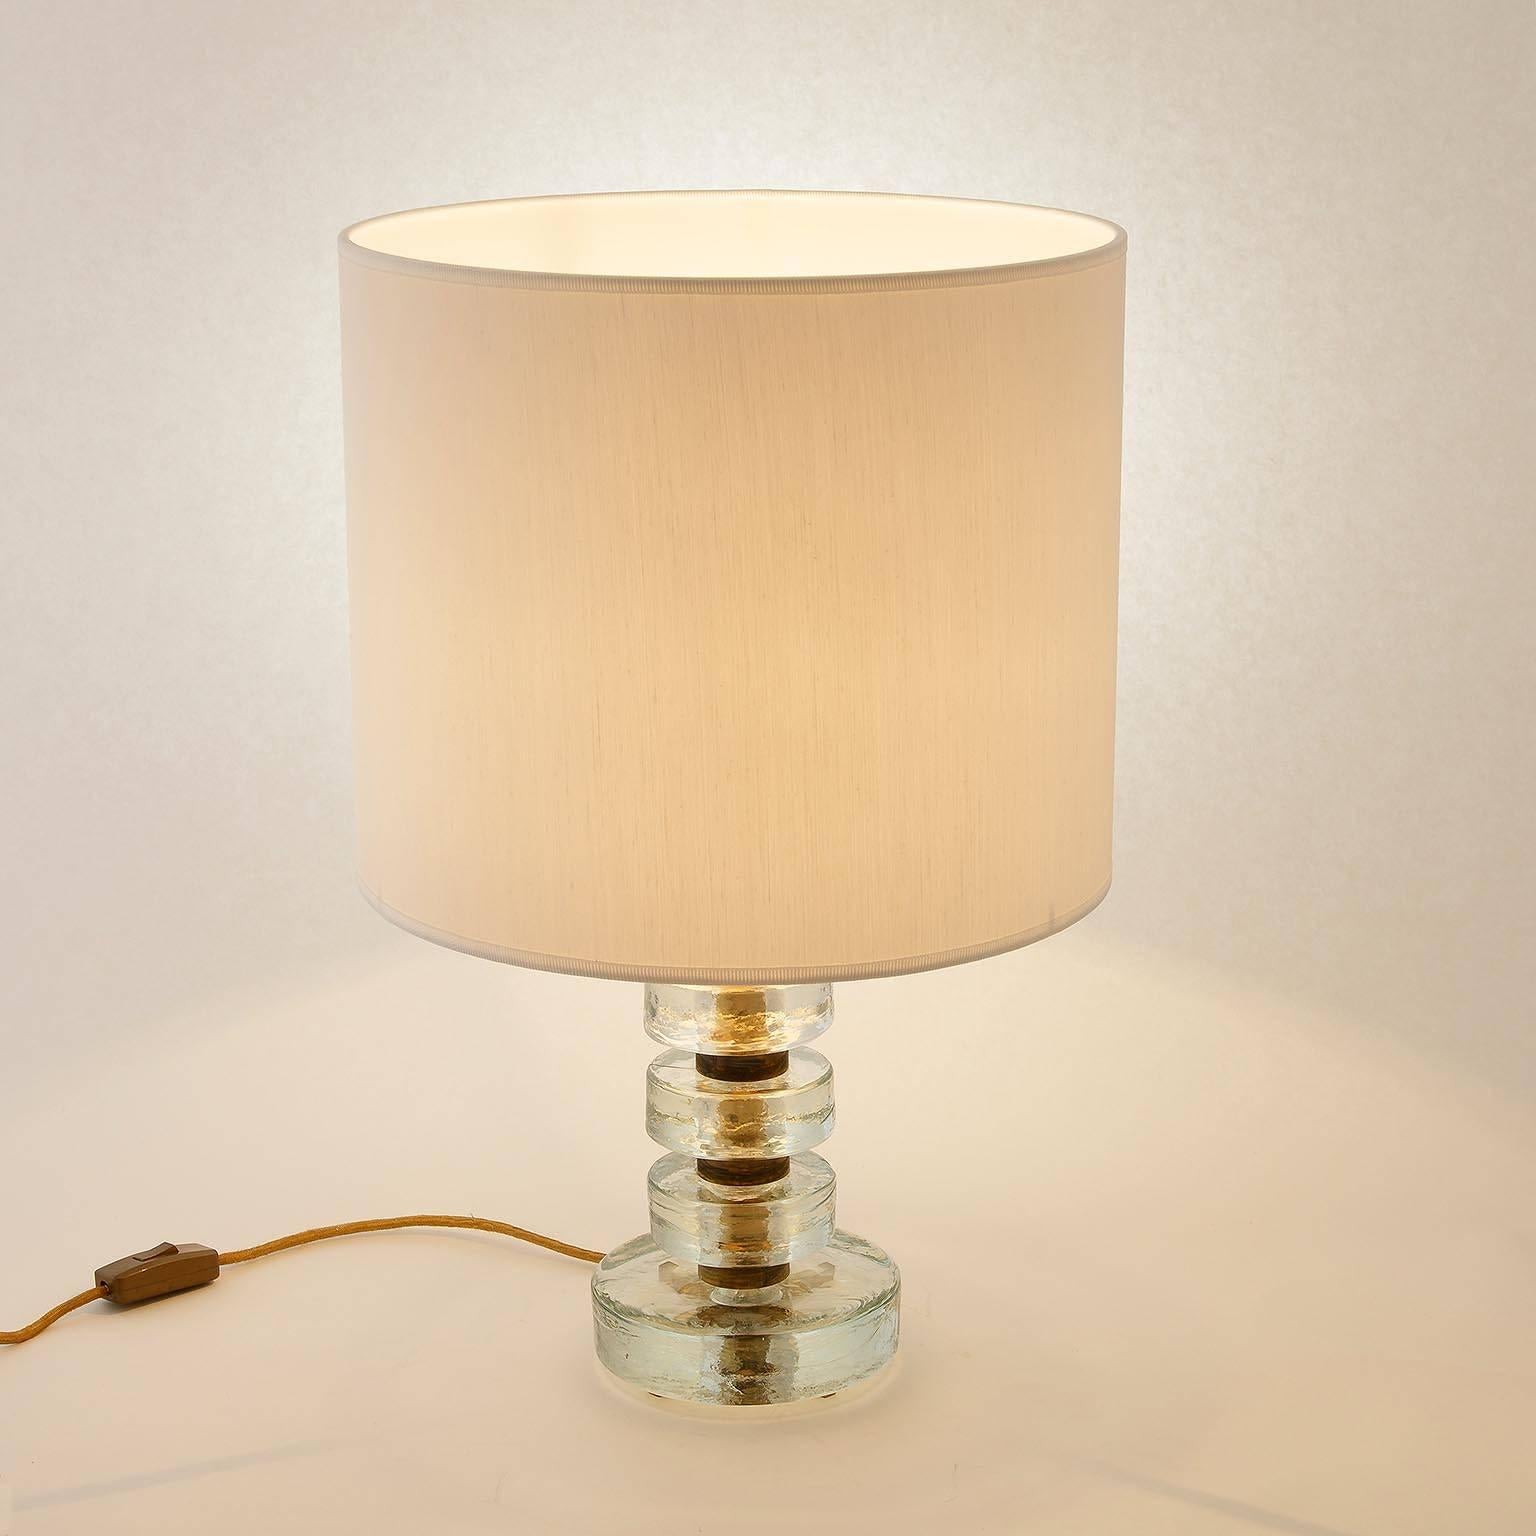 Austrian Bakalowits Table Lamp, Patinated Brass and Glass, Austria, 1960s For Sale